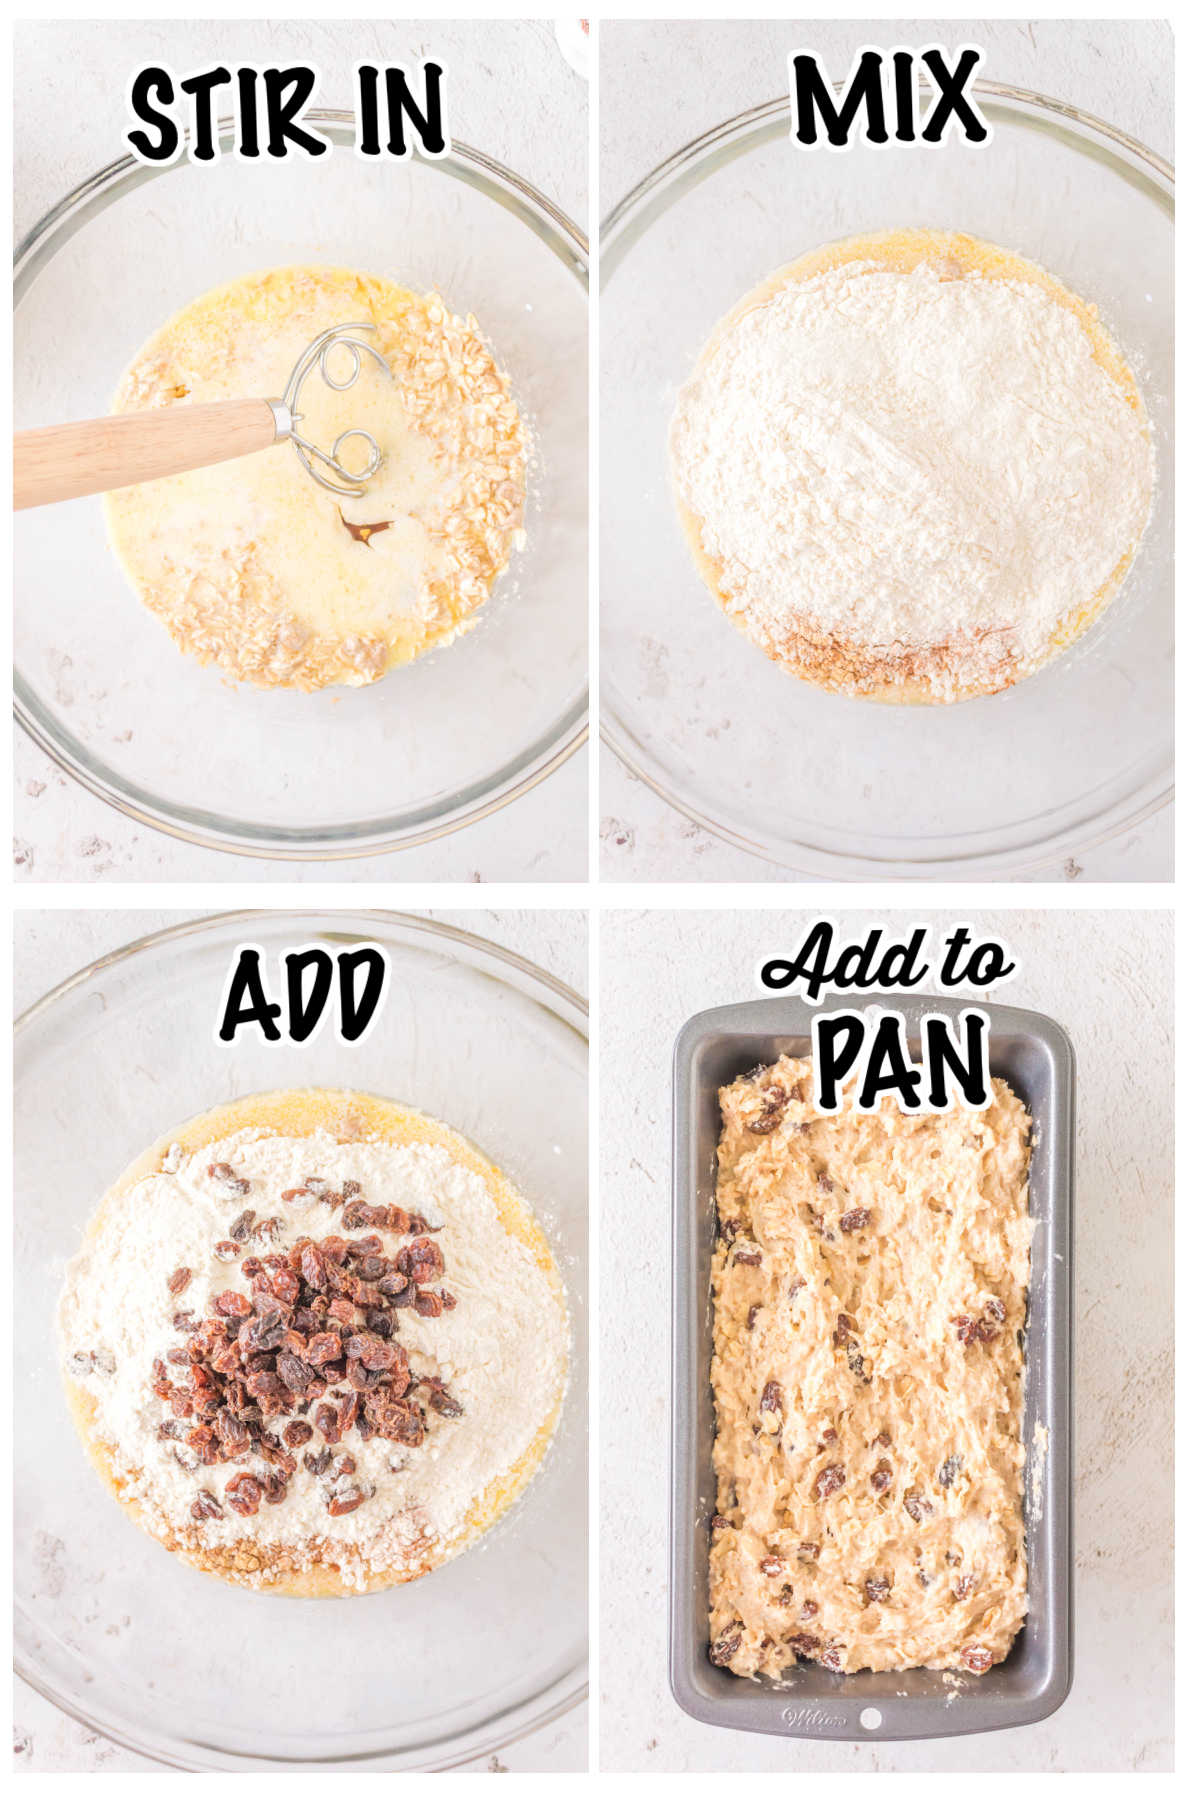 Steps for mixing the dough for raisin bread.